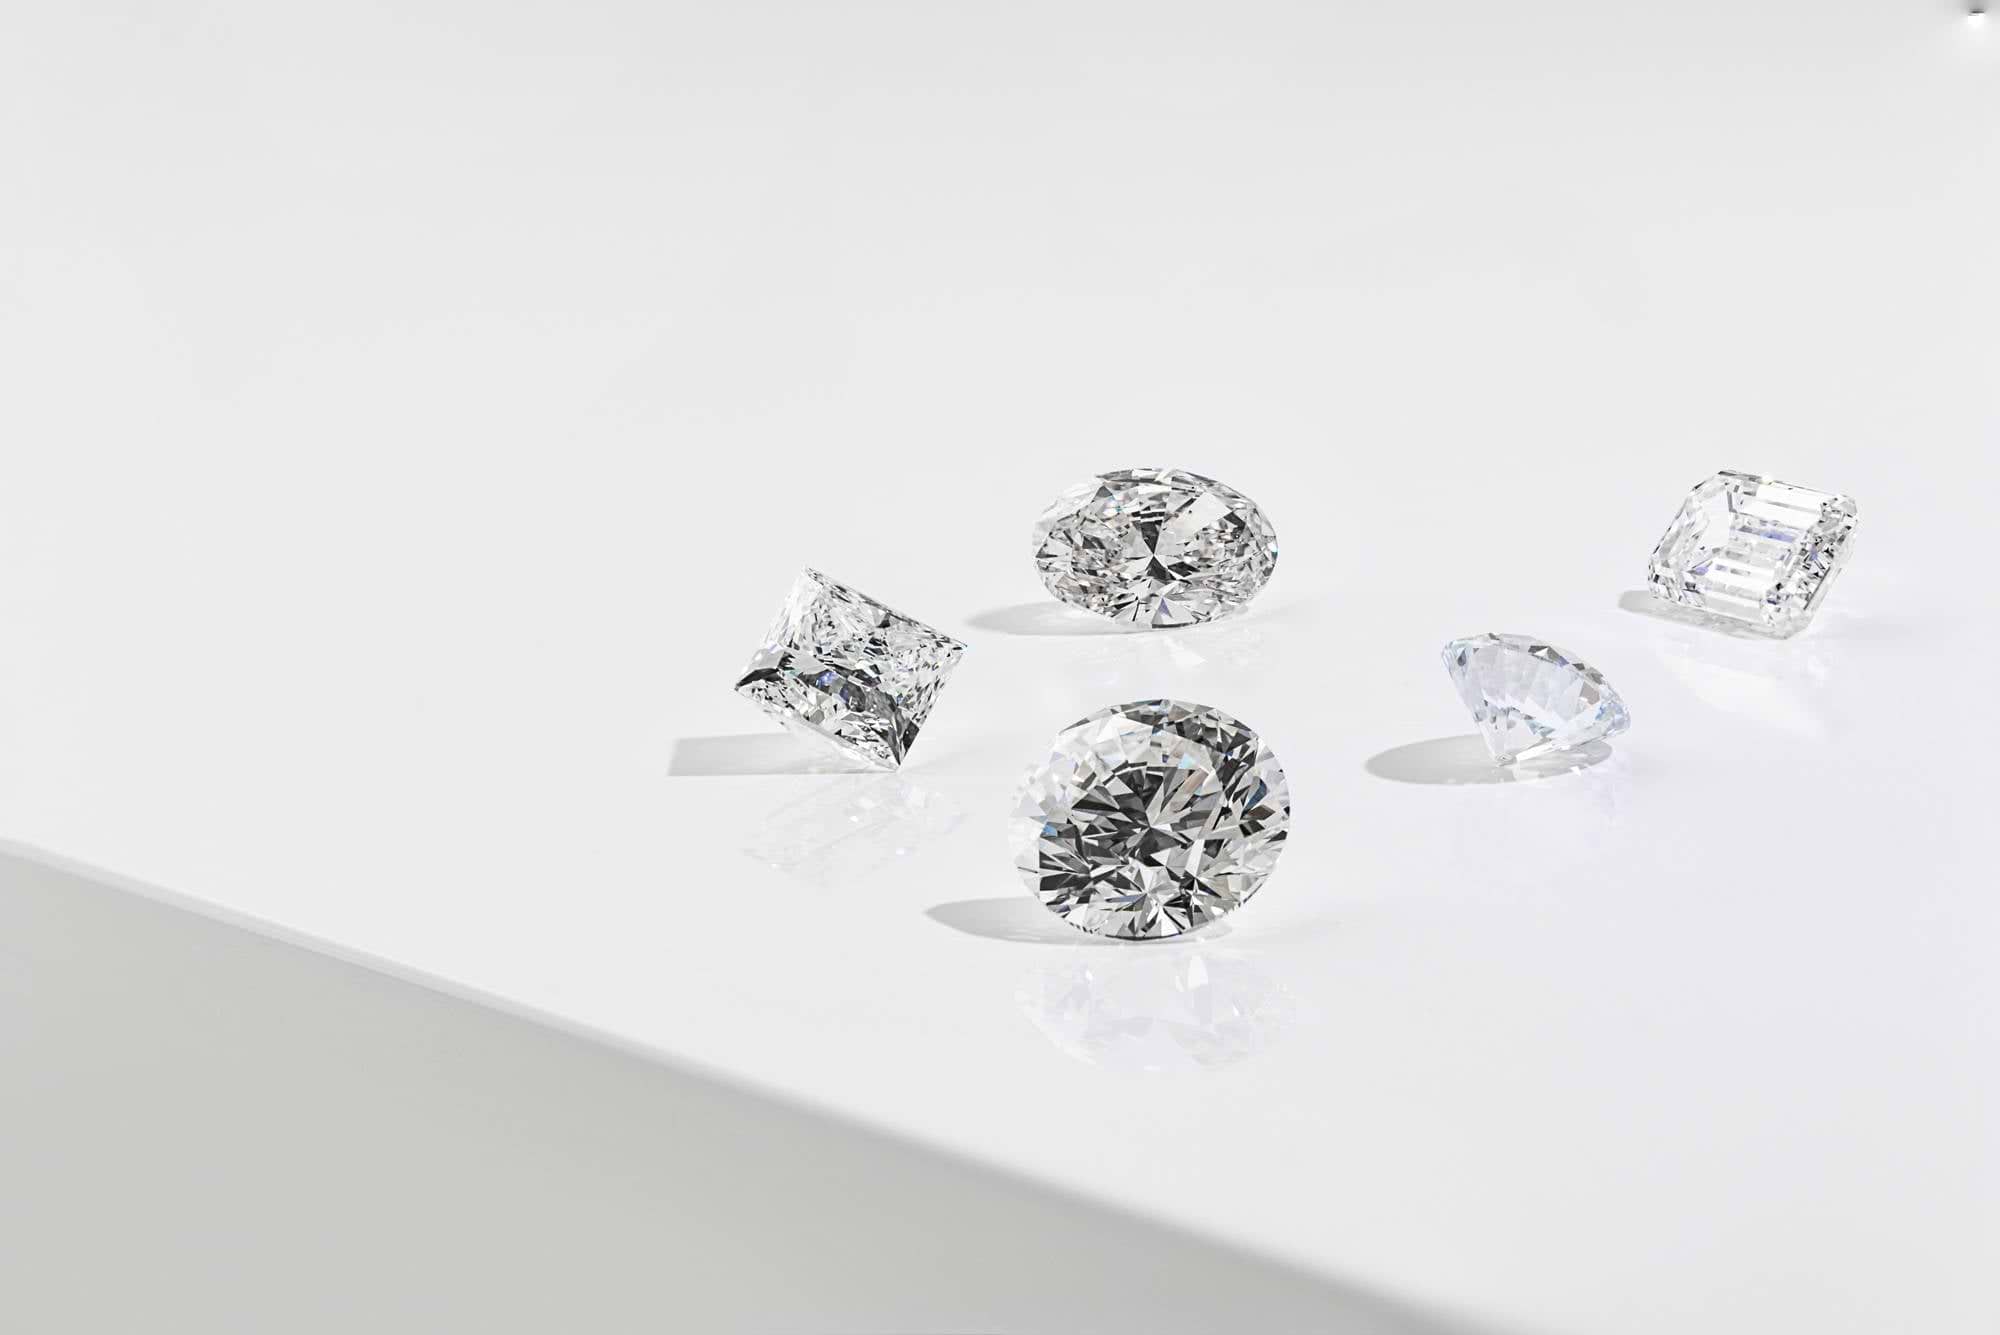 How to Choose a Diamond for Your Engagement Ring: The 4 C's